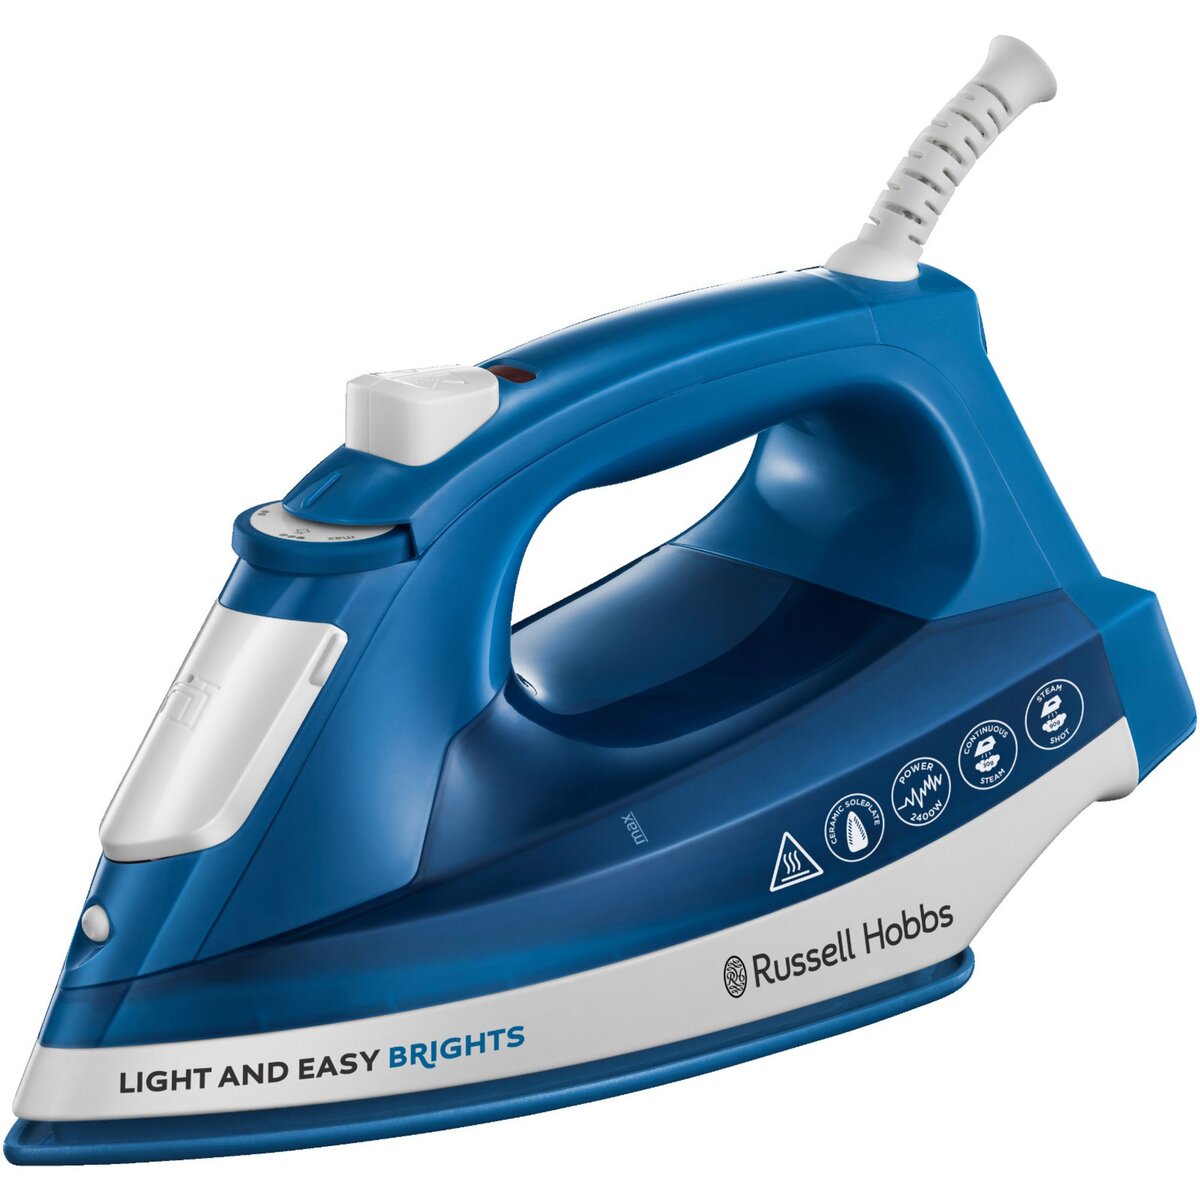 RUSSELL HOBBS Fer à repasser Light and Easy Brights Saphire